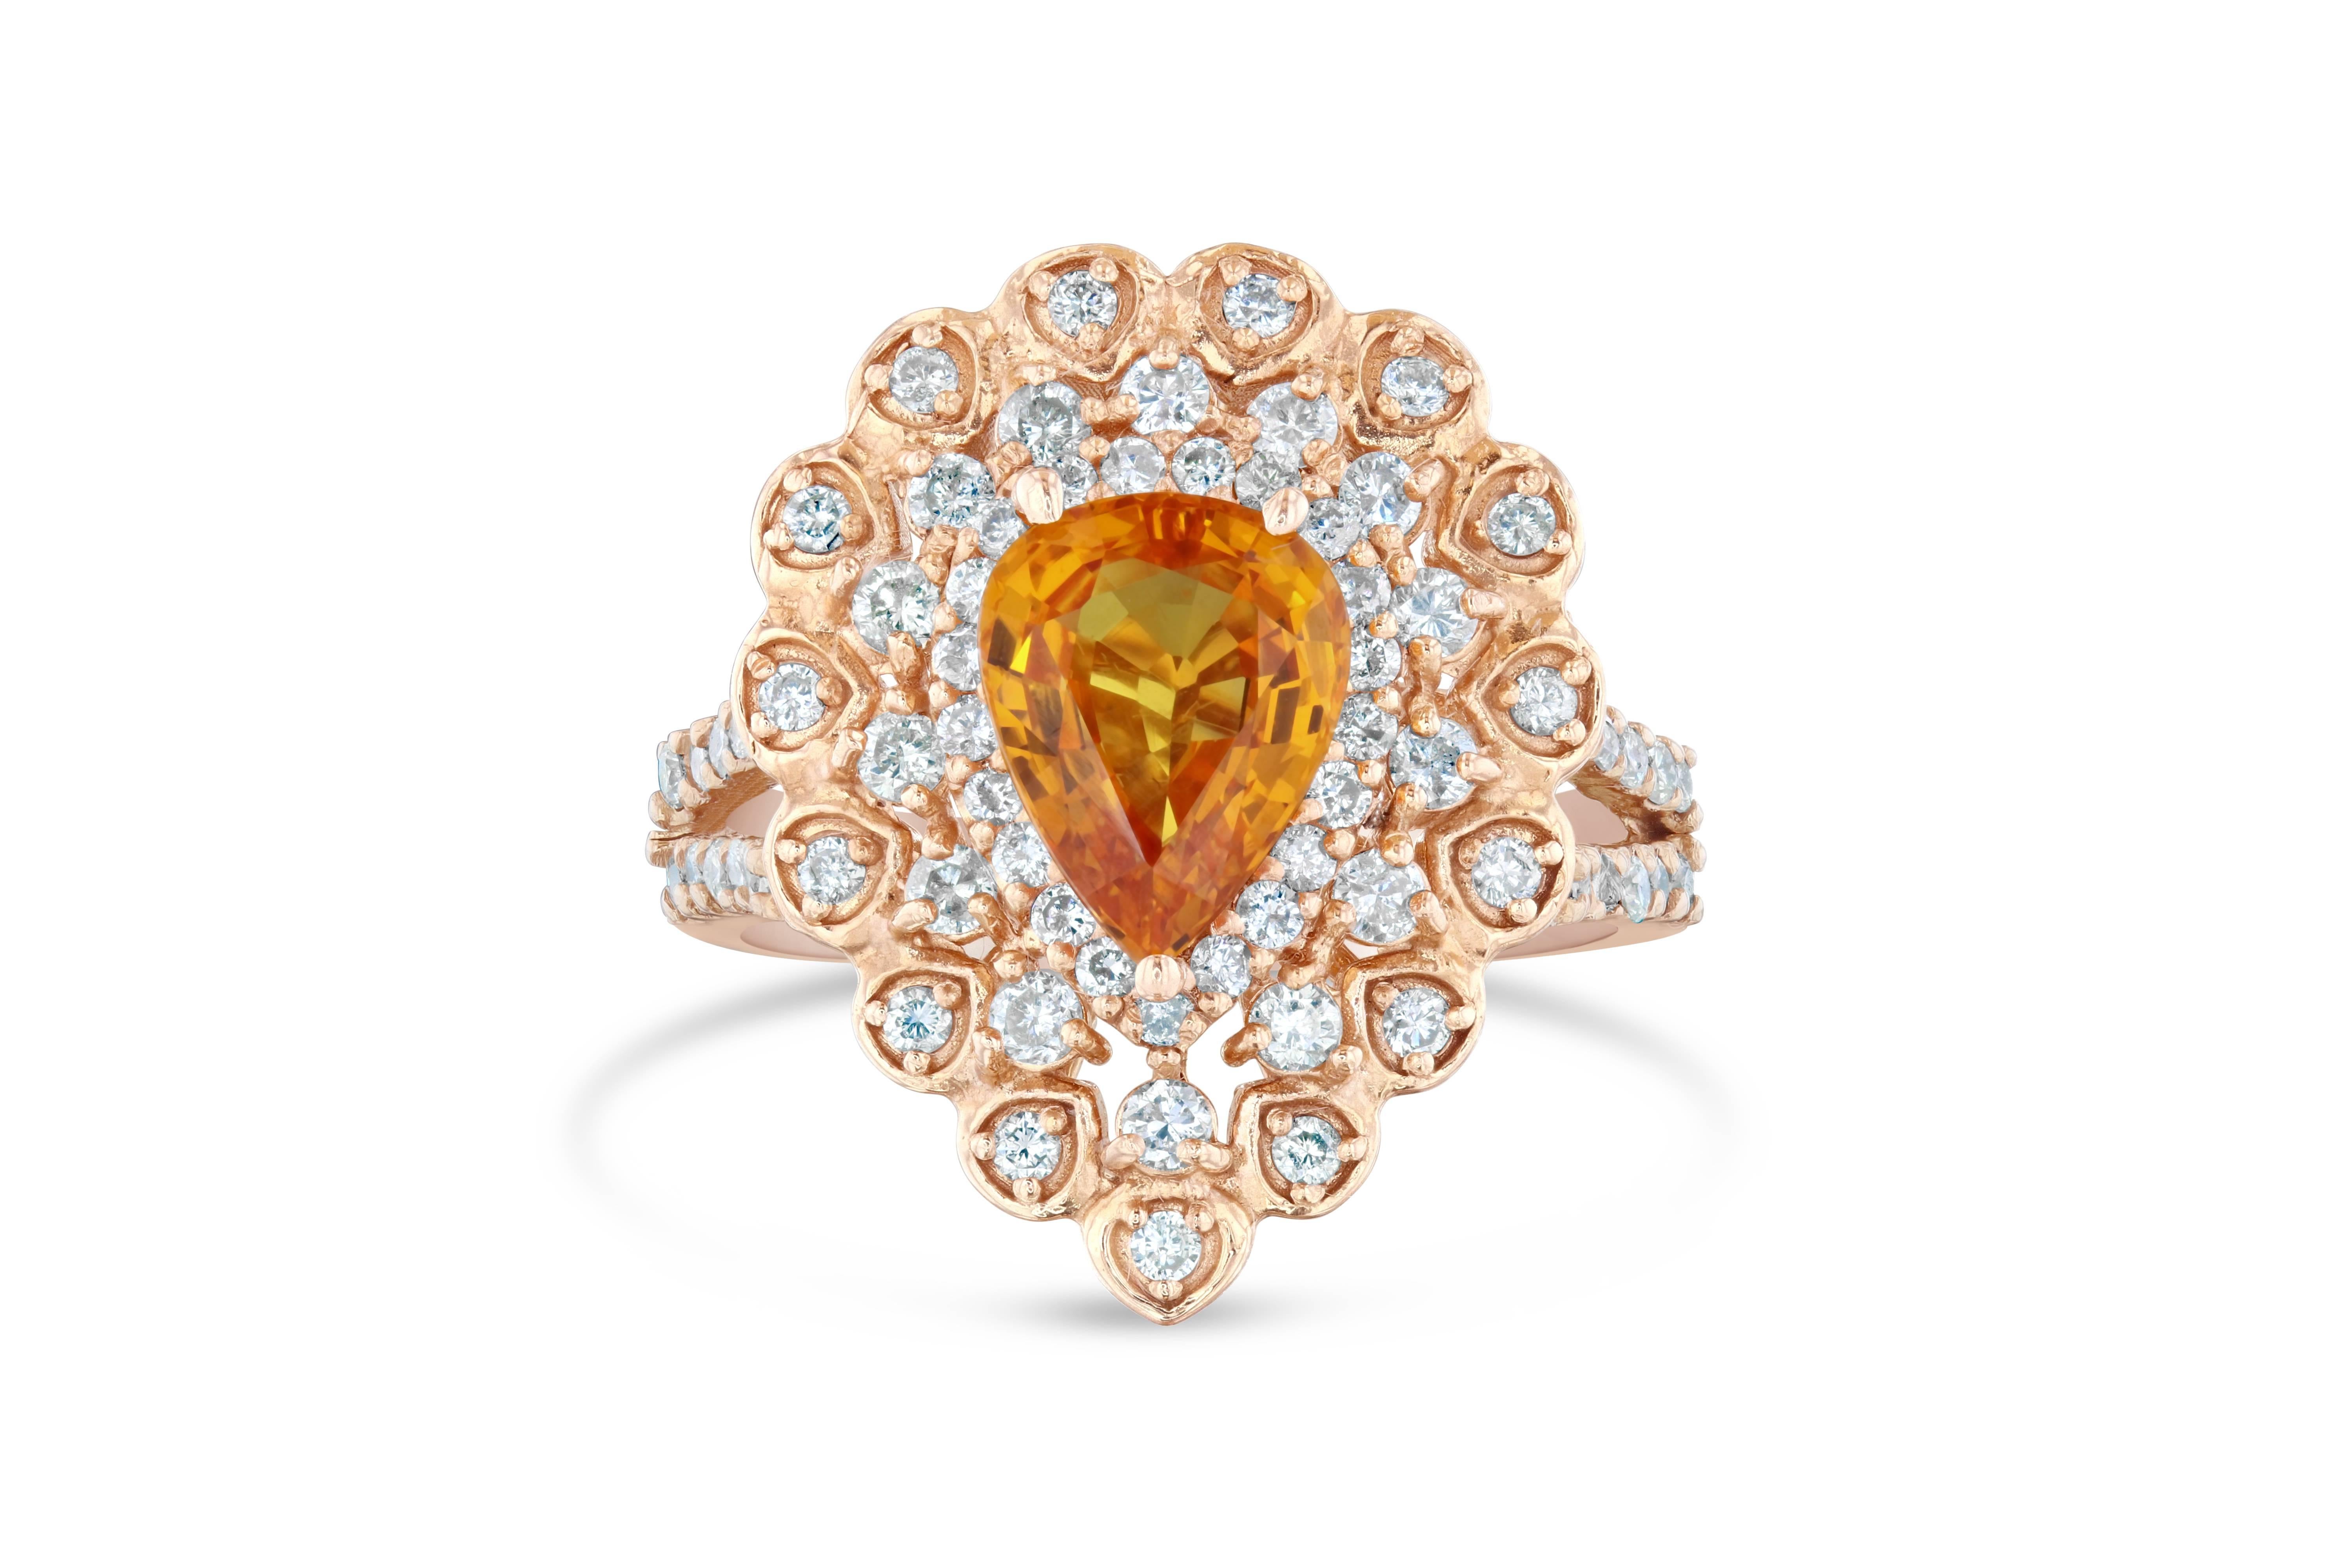 Mirror Mirror On The Wall..What is the most Beautiful Ring of all??? 
An astounding Orange Sapphire and Diamond Ring with a Victorian style setting in Rose Gold!
The Pear Cut Orange Sapphire is 2.14 Carats surrounded by 74 Round Cut Diamonds